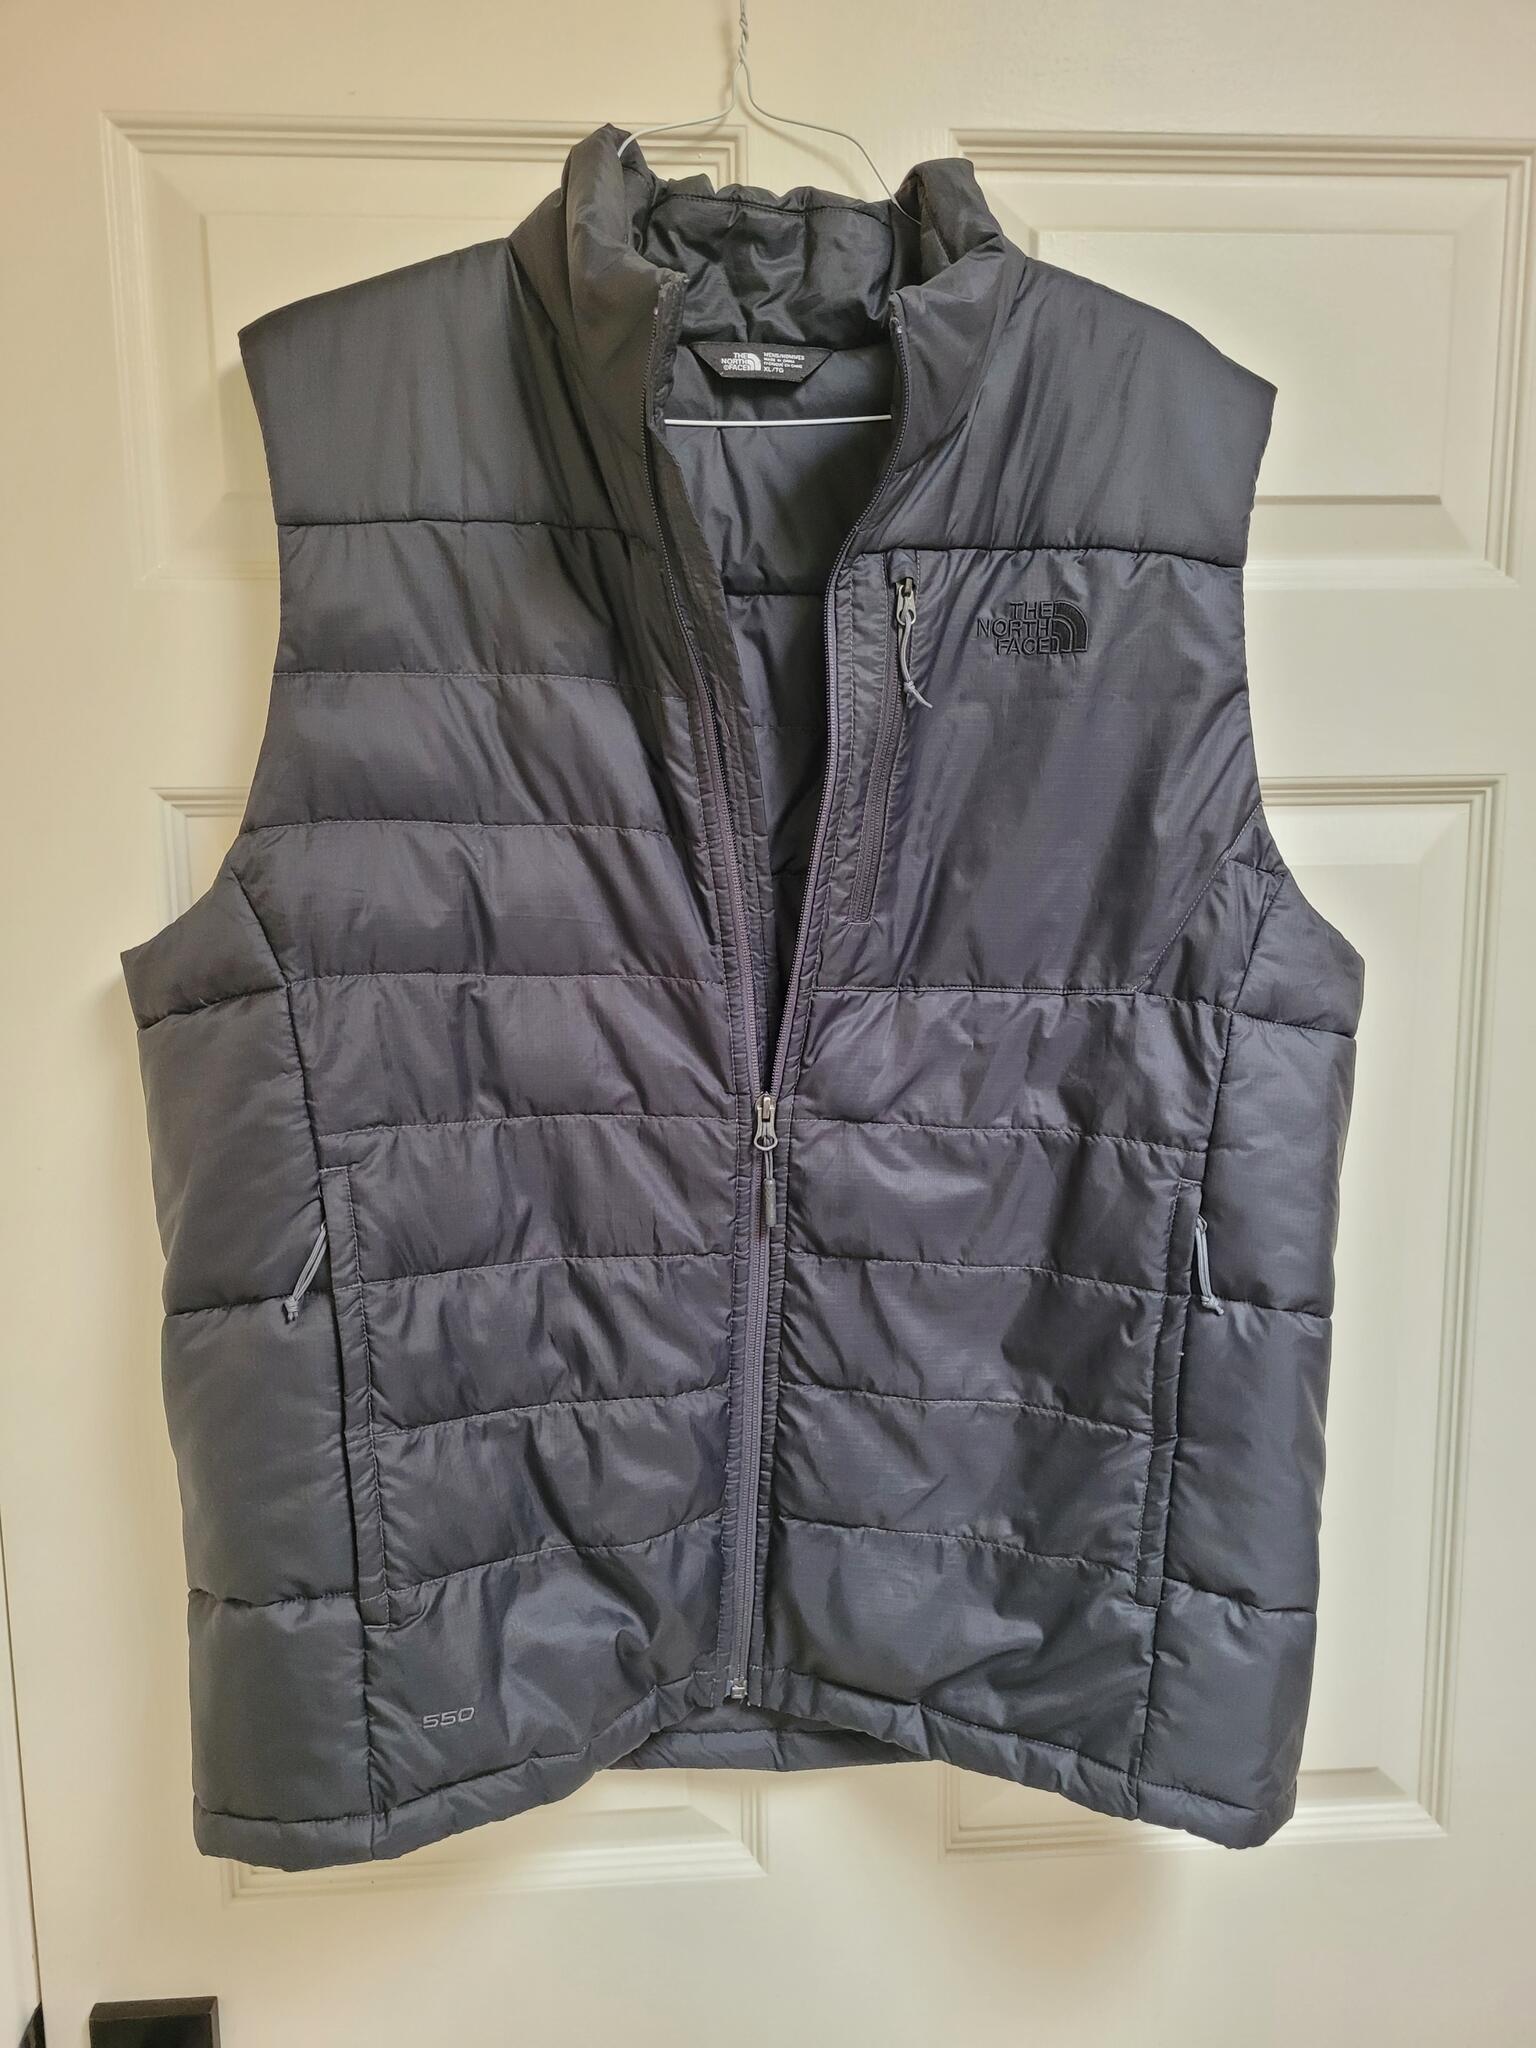 Mens North Face Aconcagua 2 Vest – XL/Blk for $50 in Green Valley, AZ ...